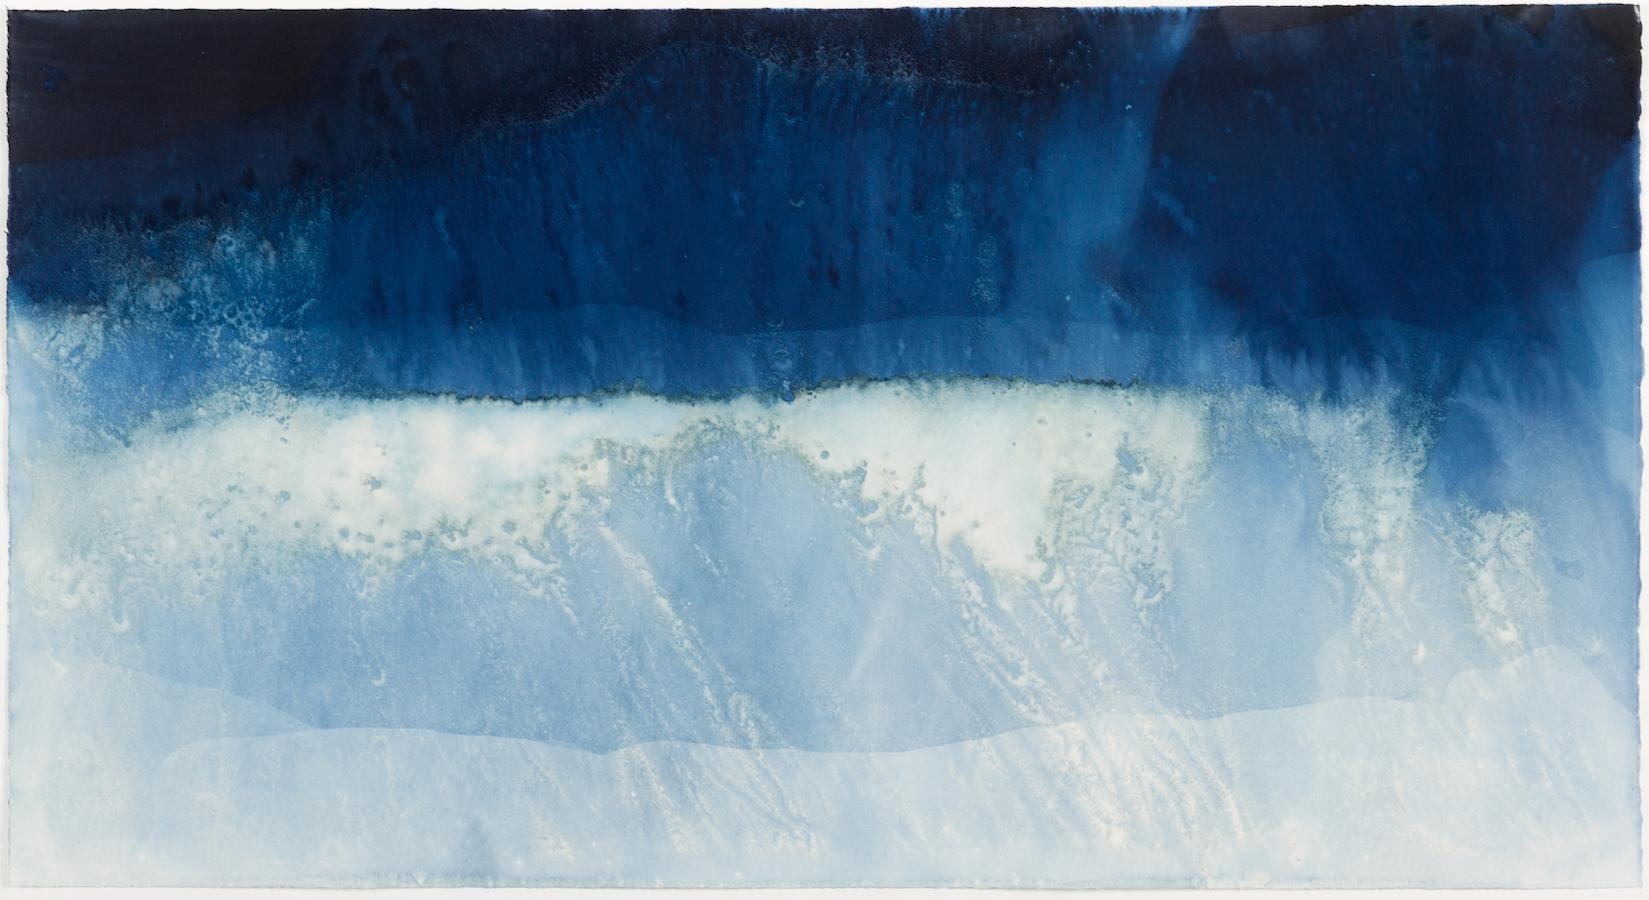 28° 14' 22.942''N, 114° 6' 4.129'' W-14. Cyanotype photograph of the ocean waves - Photograph by Paola Davila